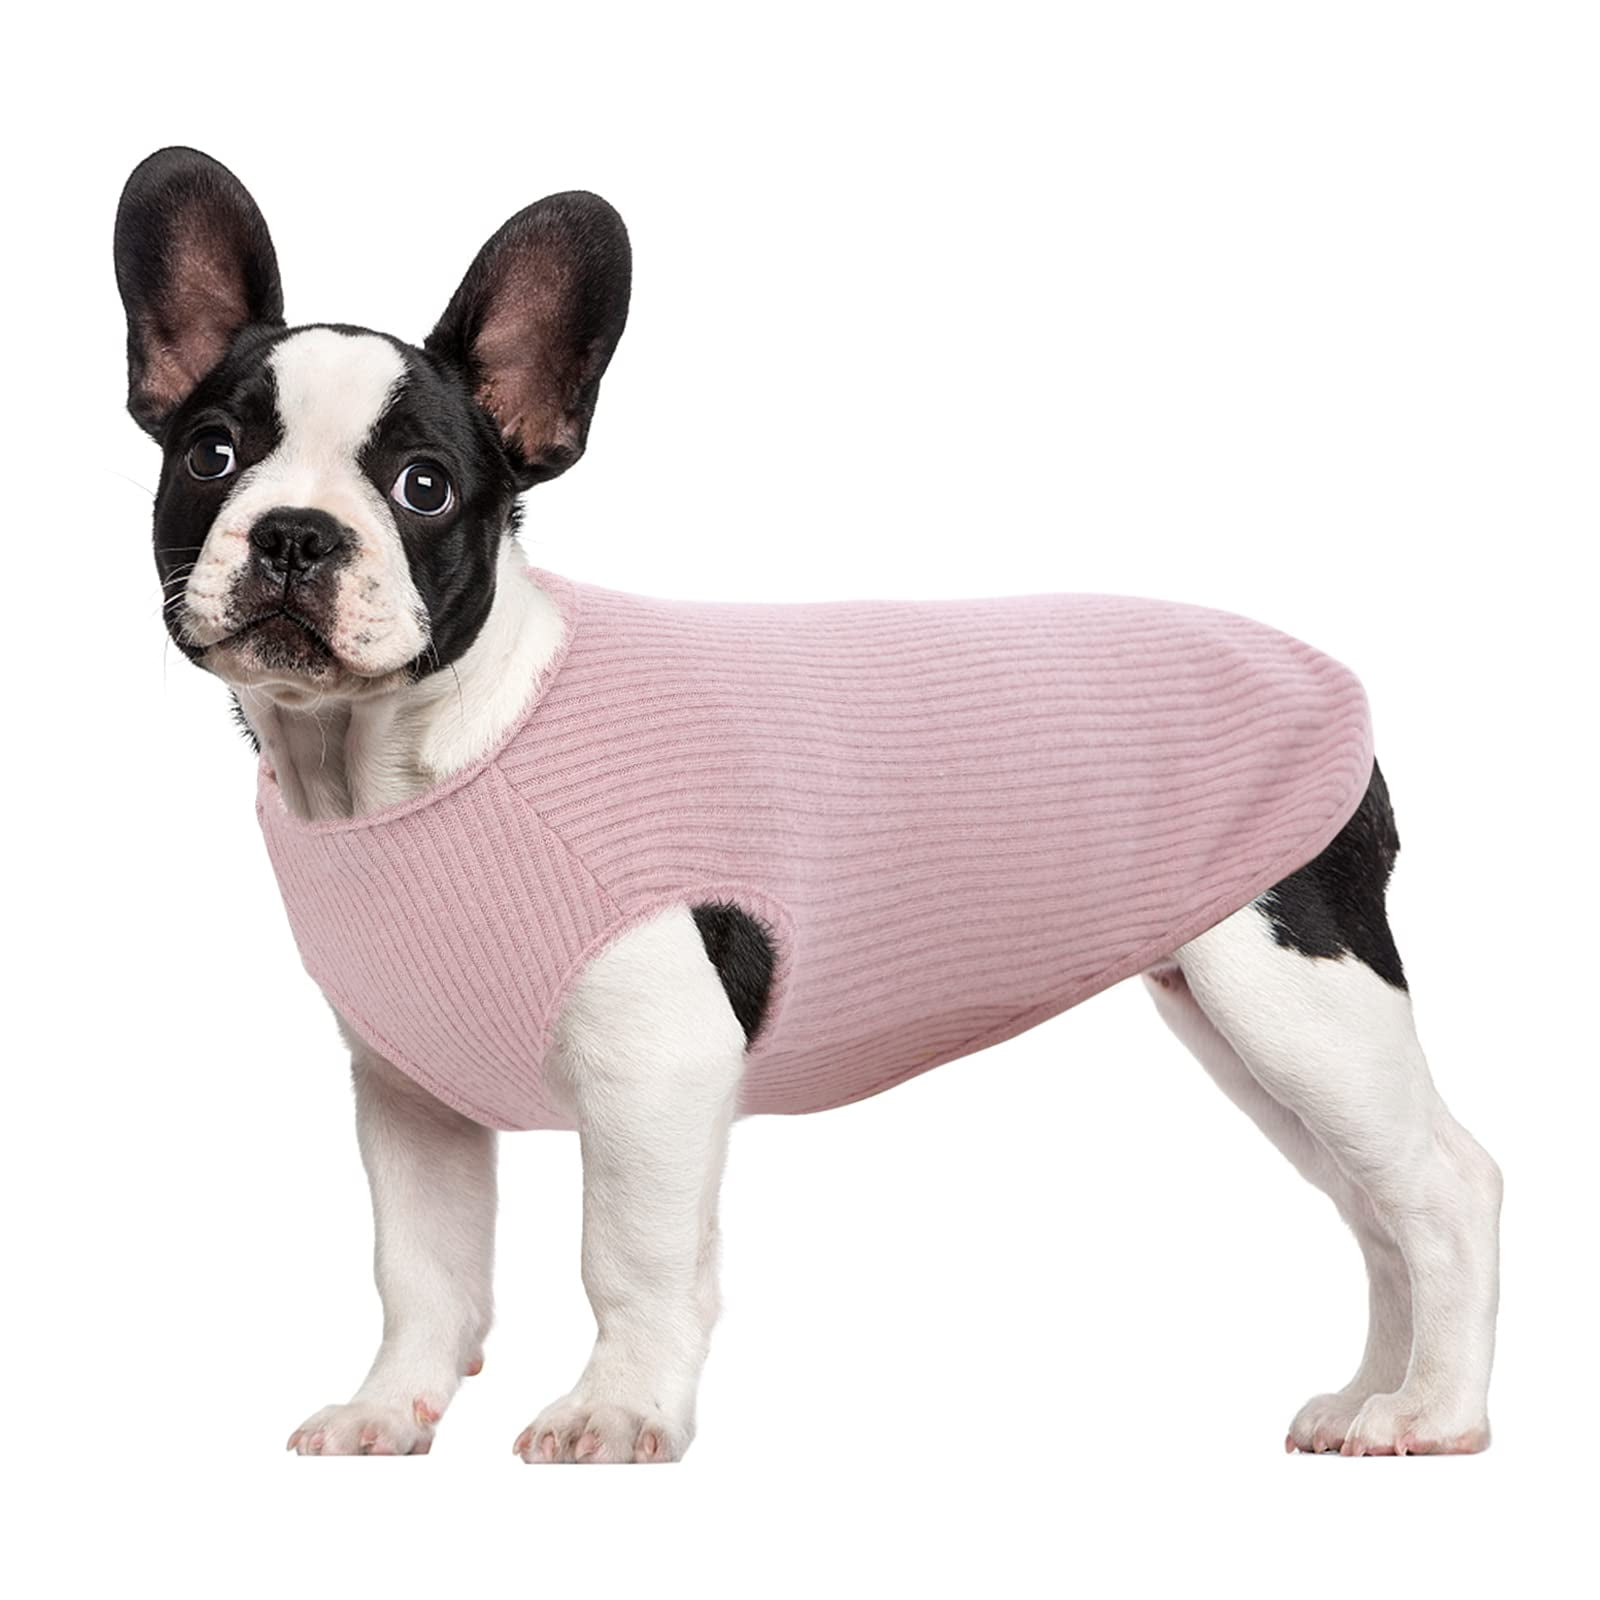 Hoodie Vest Keeps Warm Simple and Casual Suitable for Puppy cat and Dog Soft Fashionable and Comfortable Pullover in Autumn and Winter Pet Cat and Dog Sweatshirt Clothes Small Size, Pink